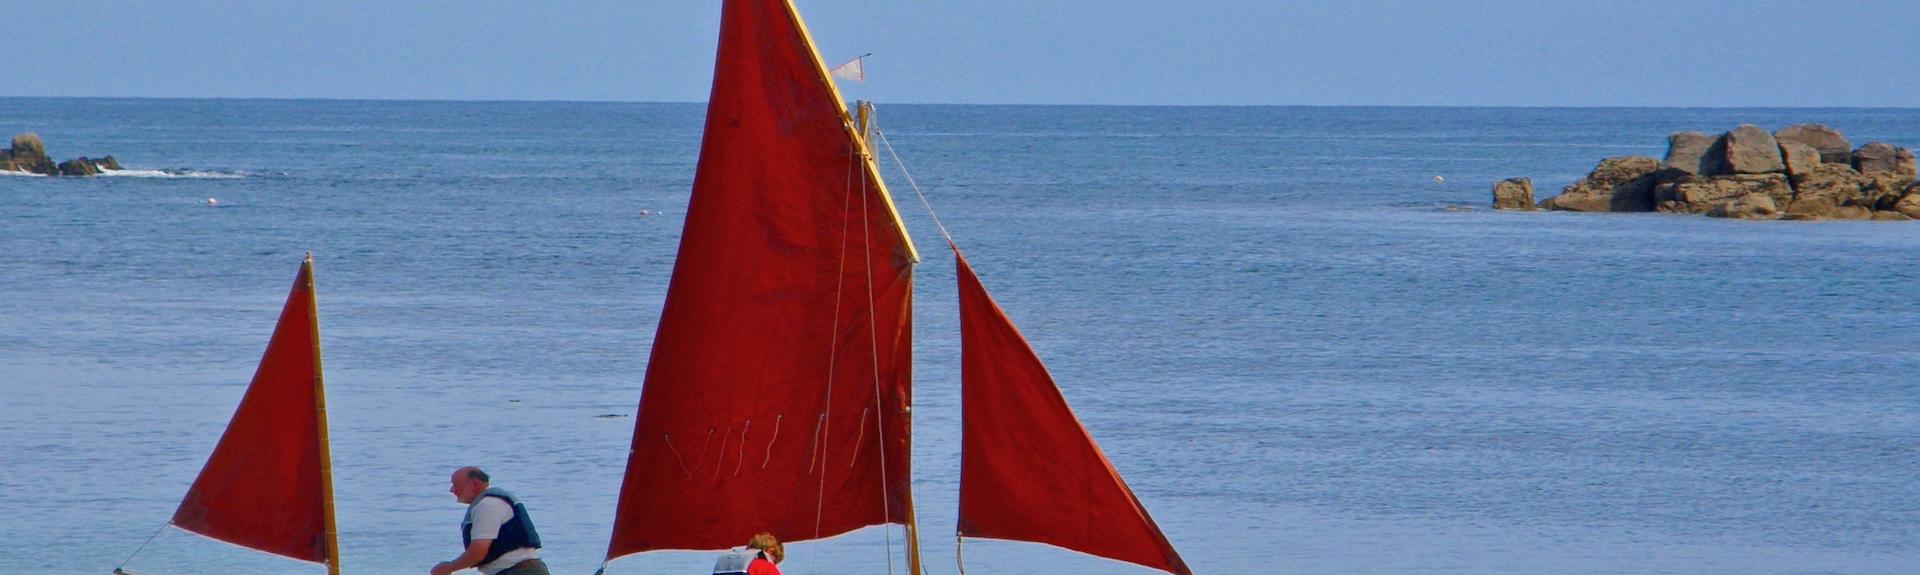 An old-fashioned sailing dinghy sets sail from a sandy beach